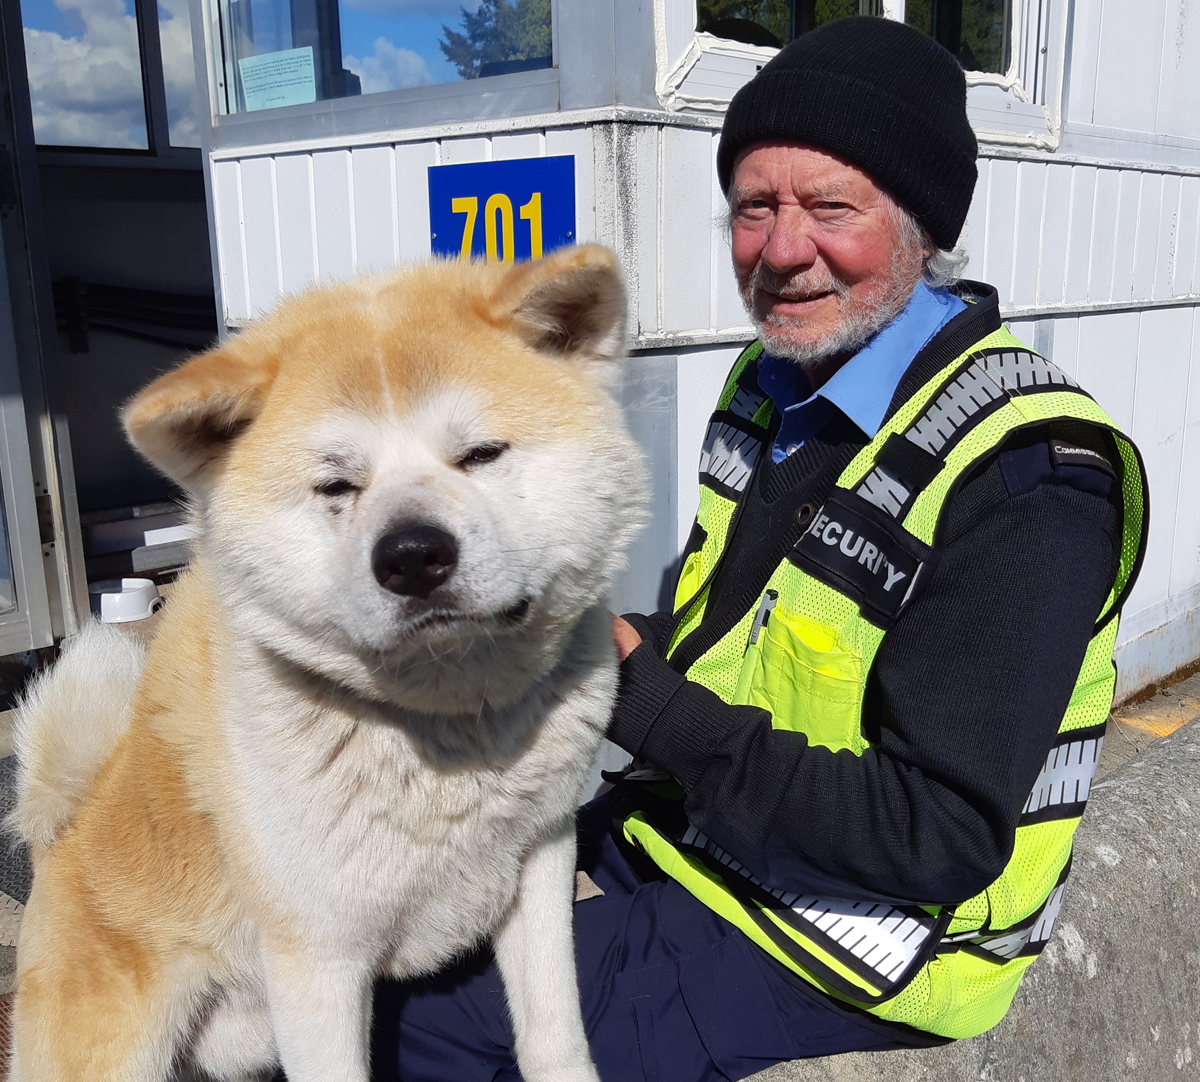 The friendly faces of Commissionaire Bob Cosman and his new dog Teddy are ready to greet visitors to the Y-Jetty security gate at CFB Esquimalt. Photo: Peter Mallett/Lookout.